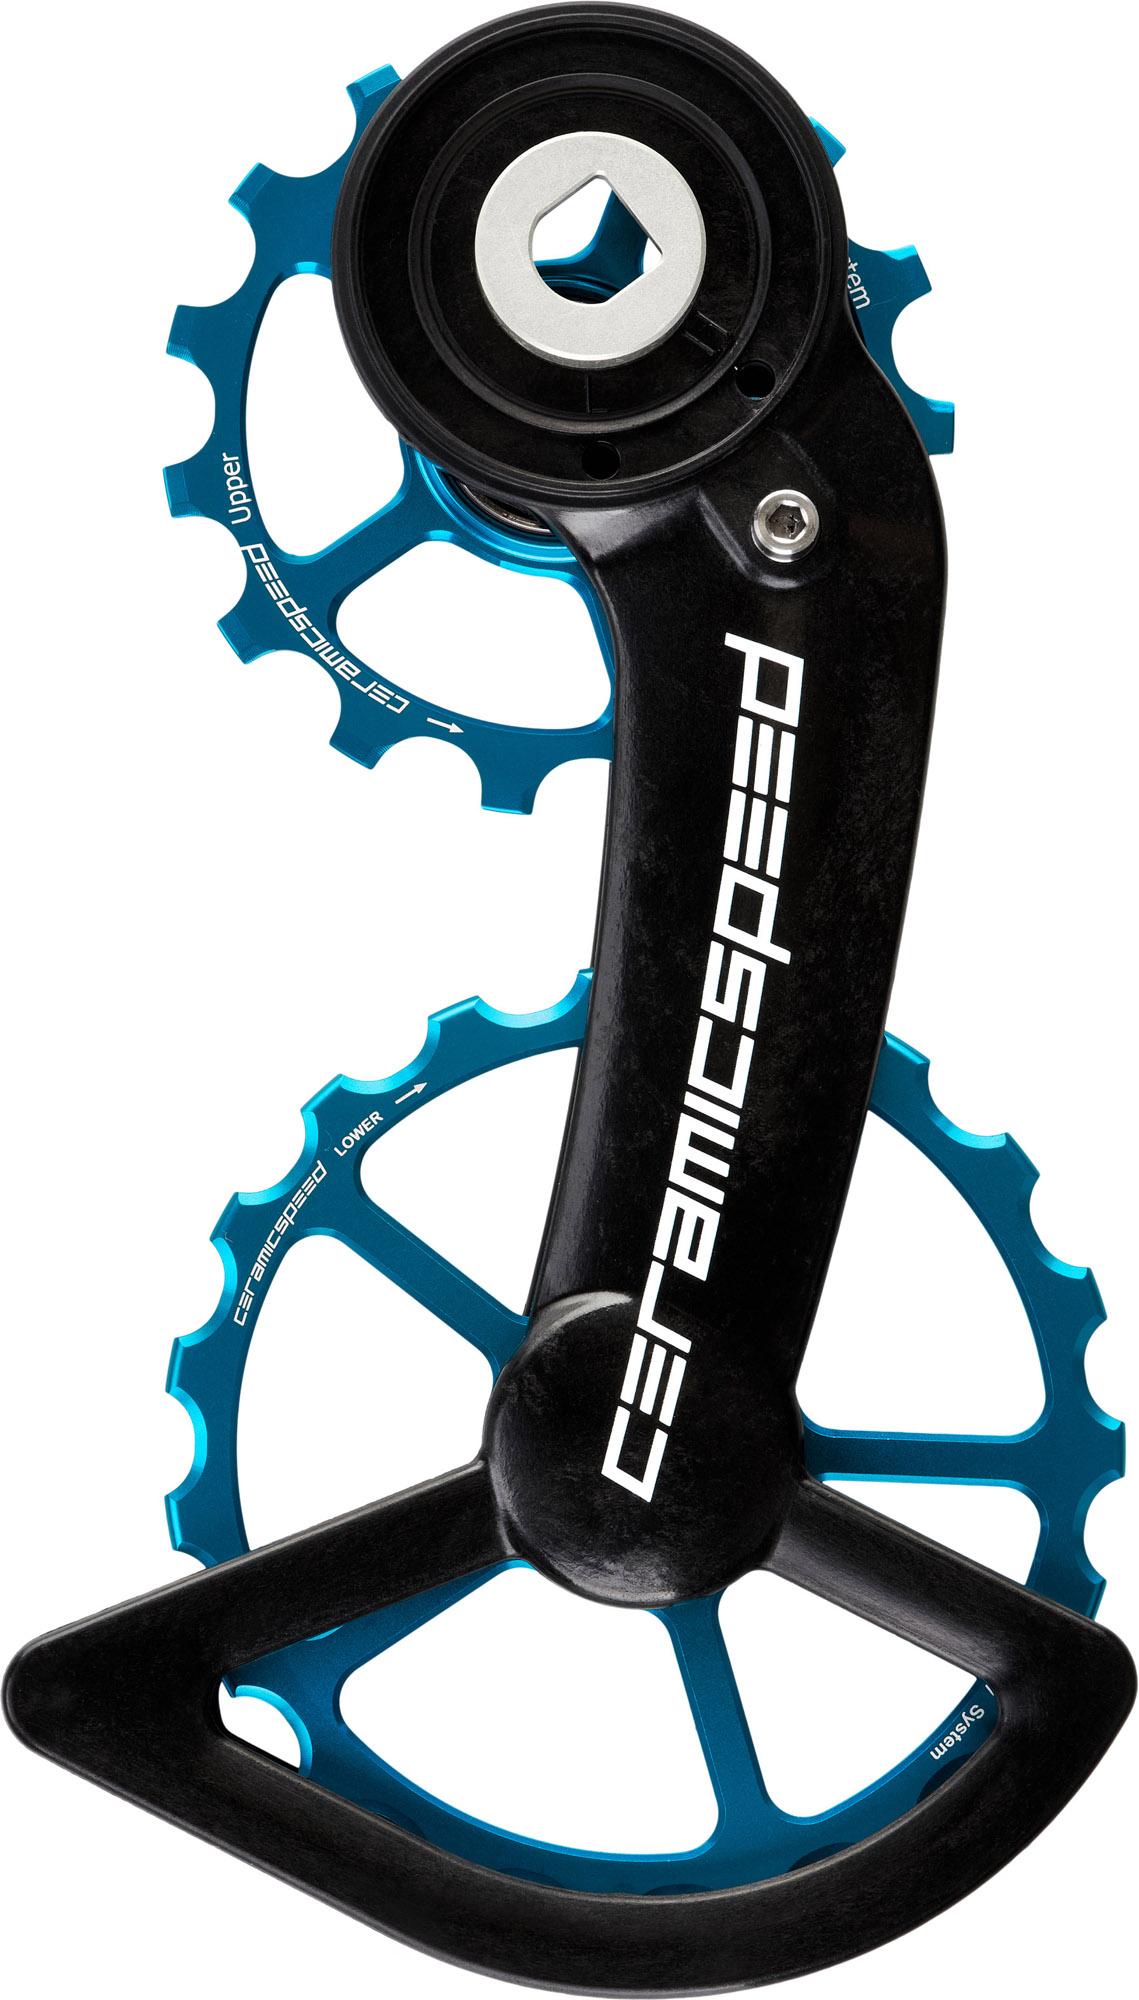 Ceramicspeed Ospw Sram Red And Force Axs - Blue